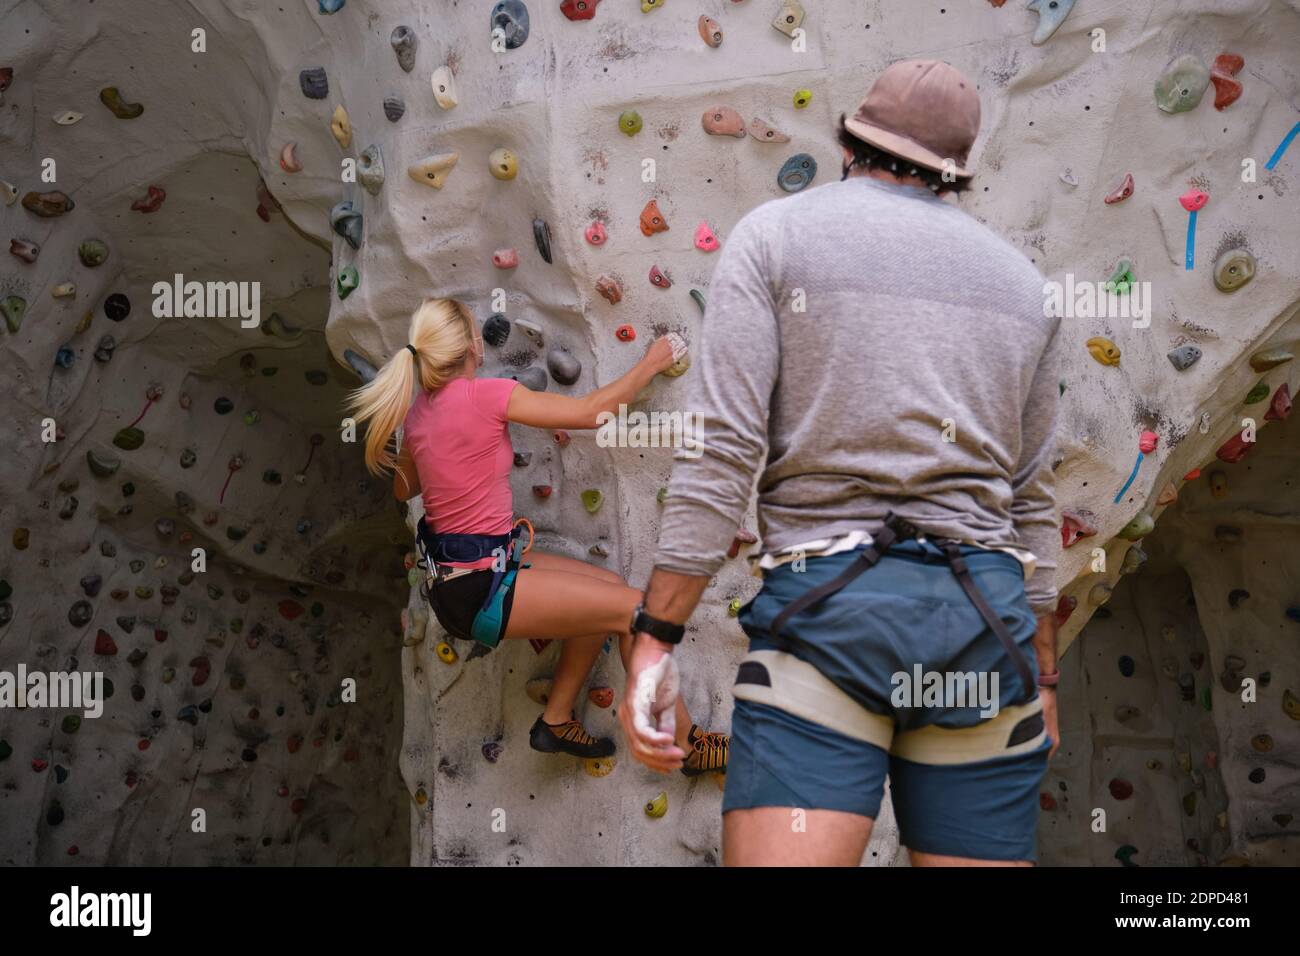 Two young friends climbing a wall on artificial rock climbing wall indoors. Extreme sports concept. Stock Photo